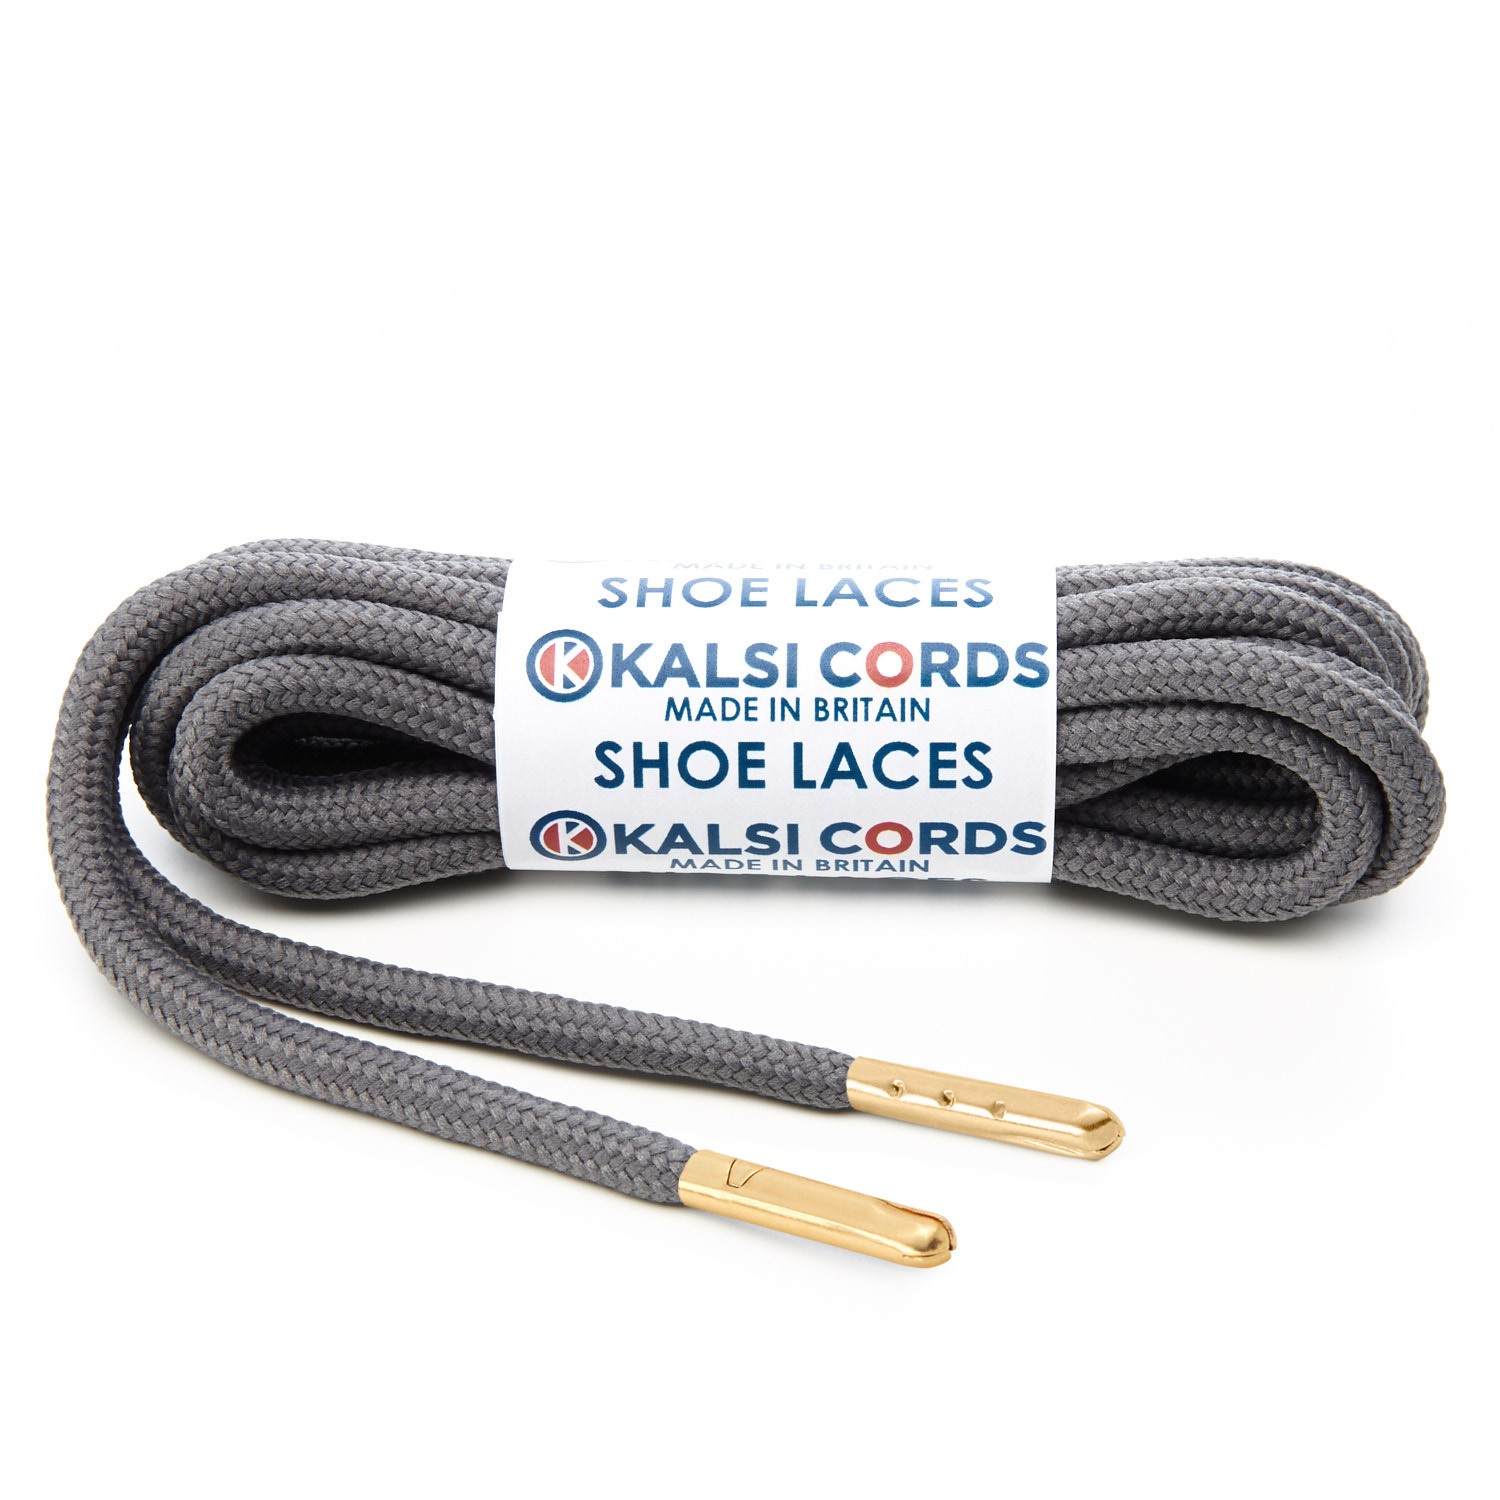 T621 5mm Round Polyester Shoe Laces Grey 1 Gold Metal Tip Kalsi Cords